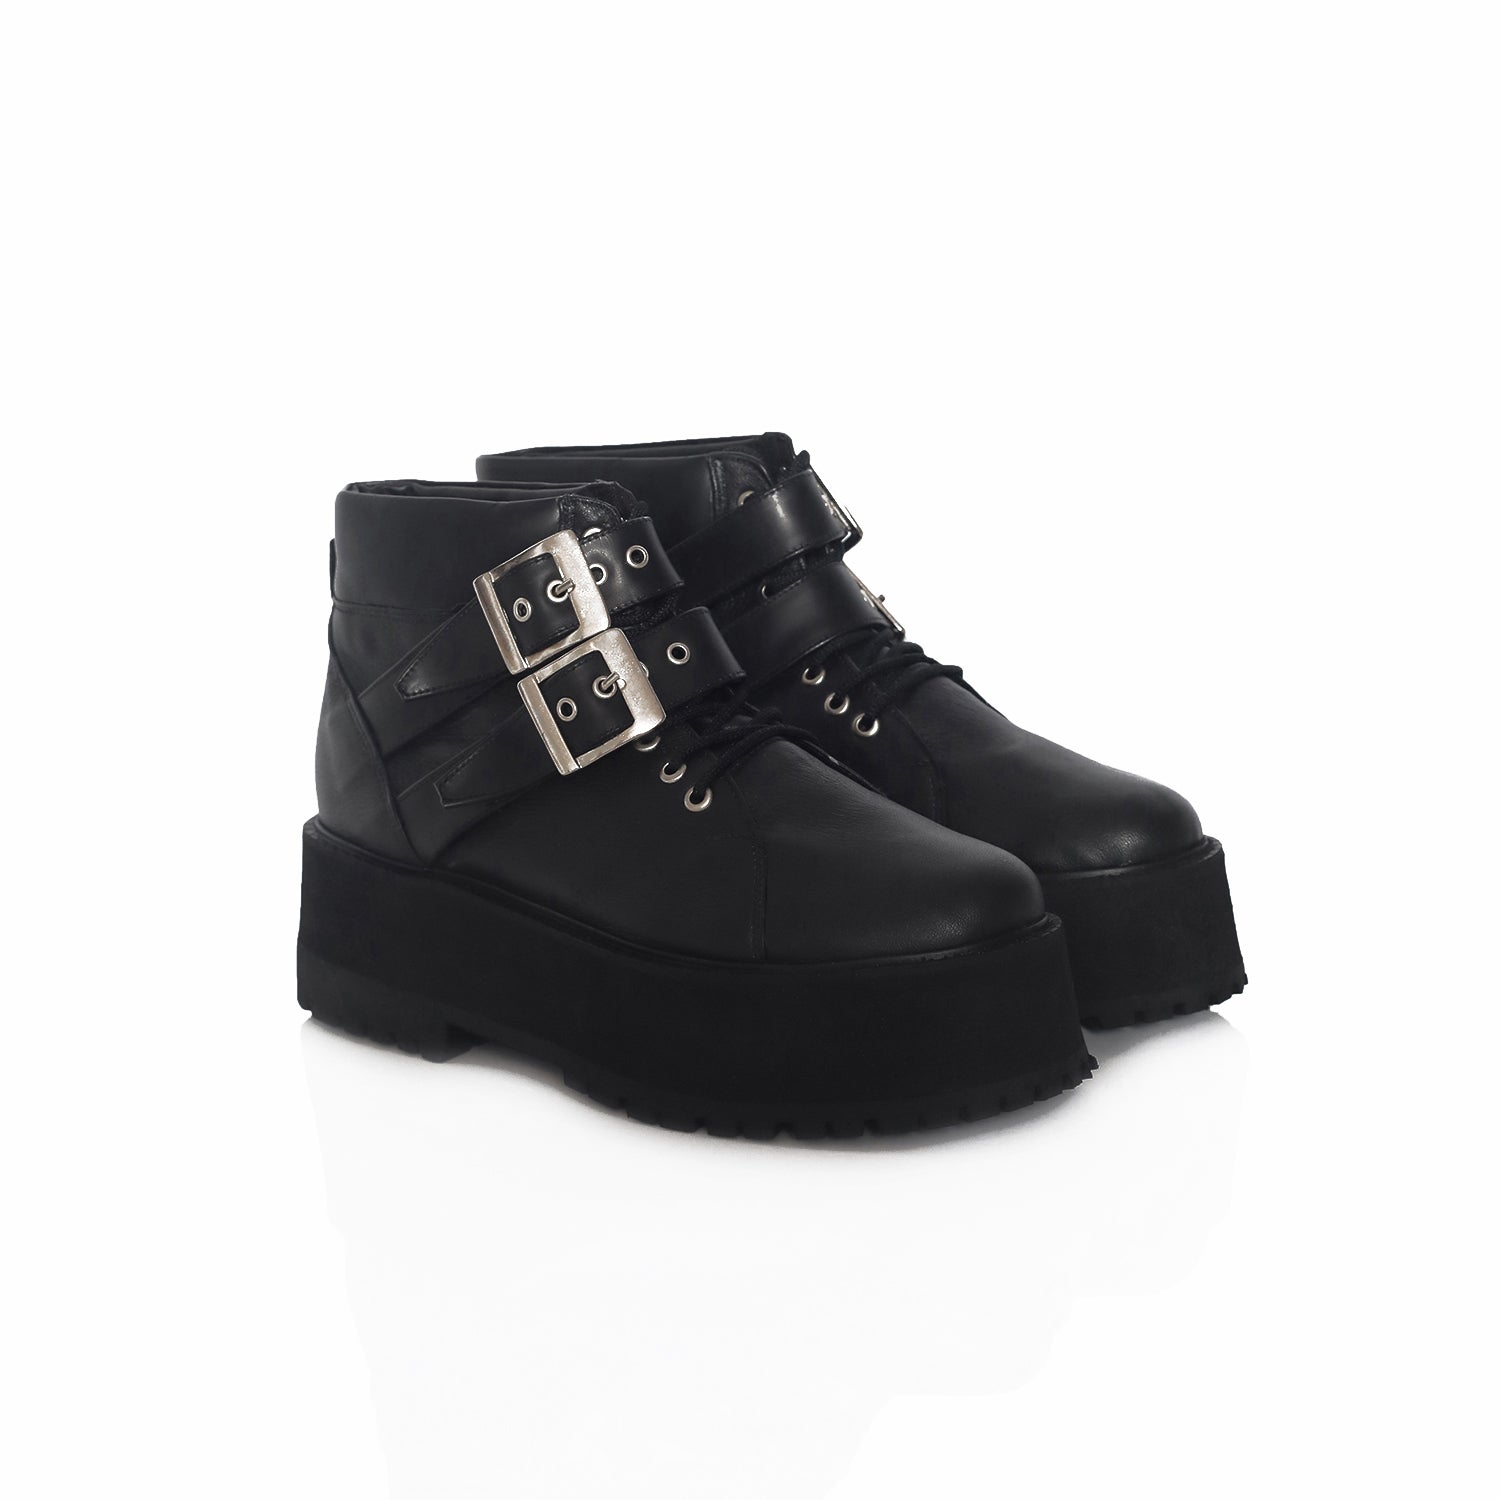 REBELLE BOOTS (6128701440167)